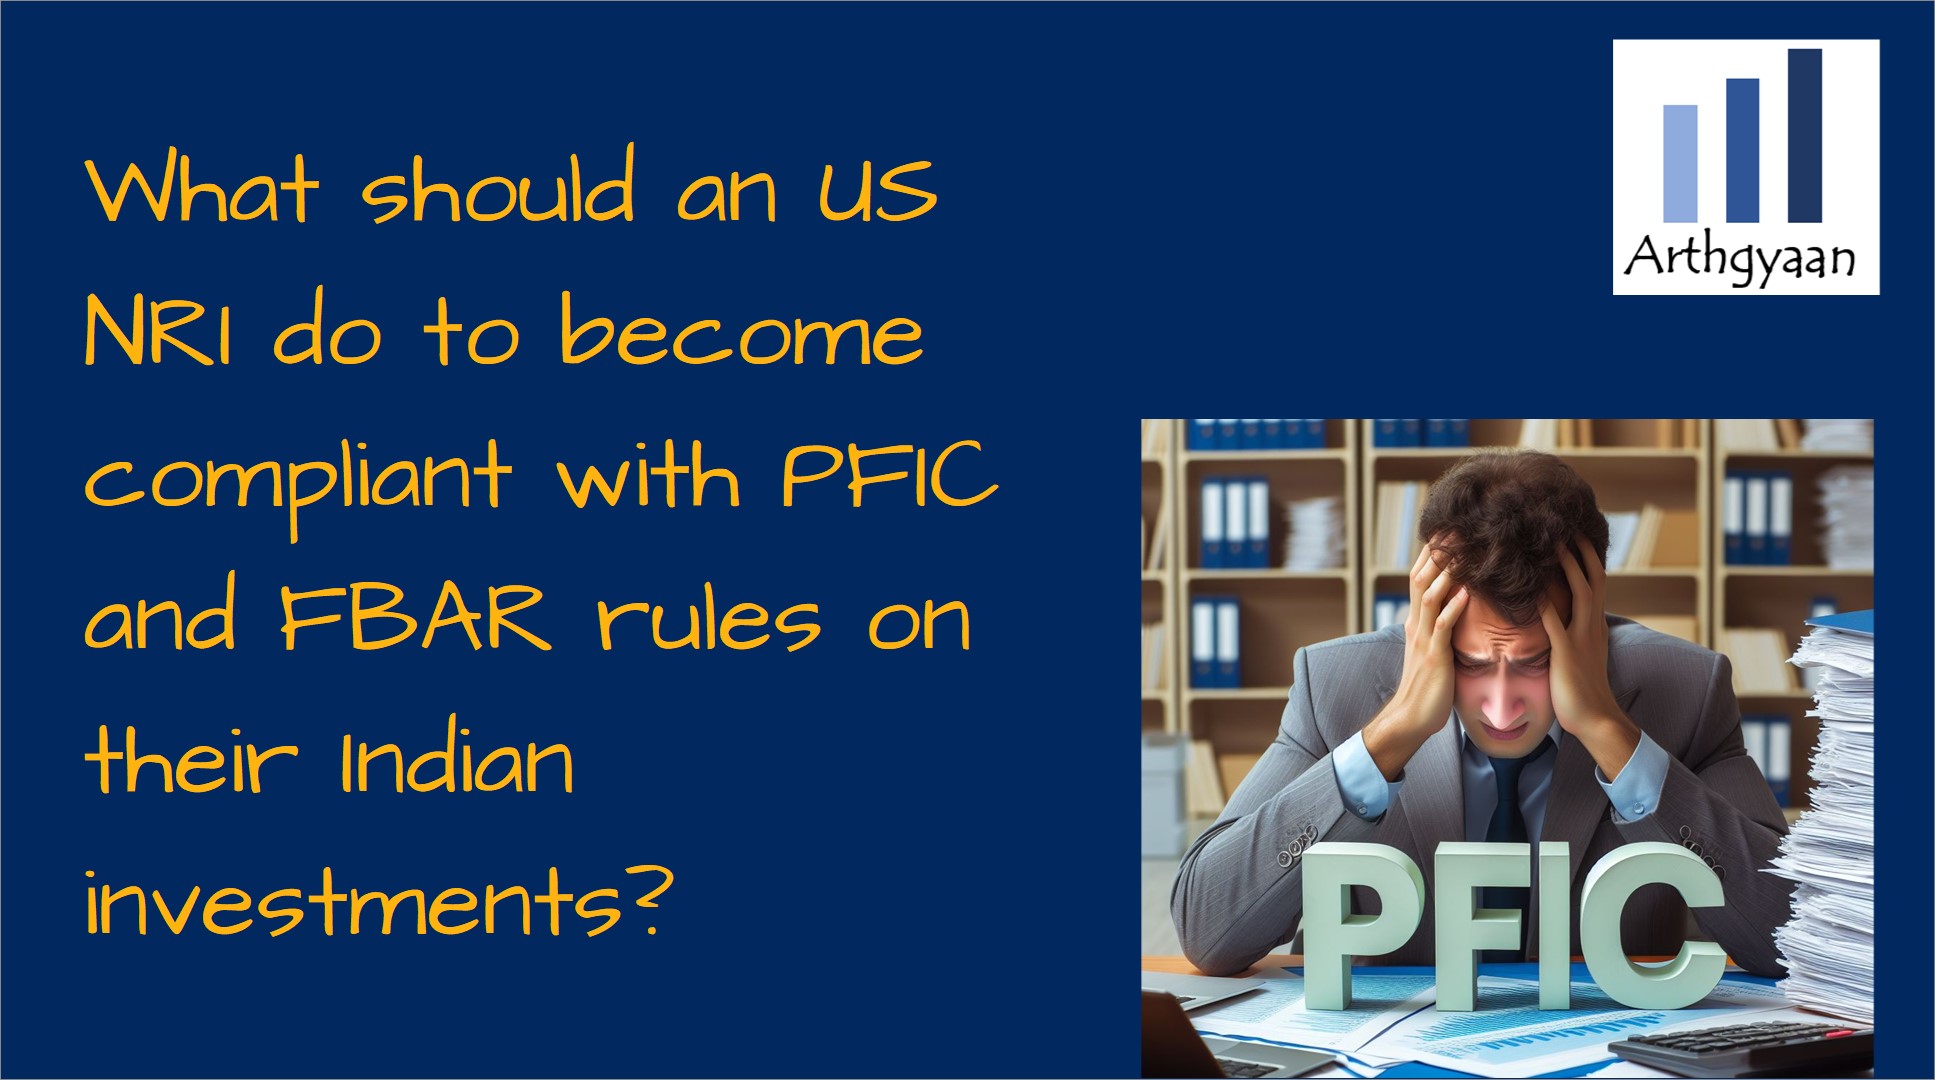 What should an US NRI do to become compliant with PFIC and FBAR rules on their Indian investments?